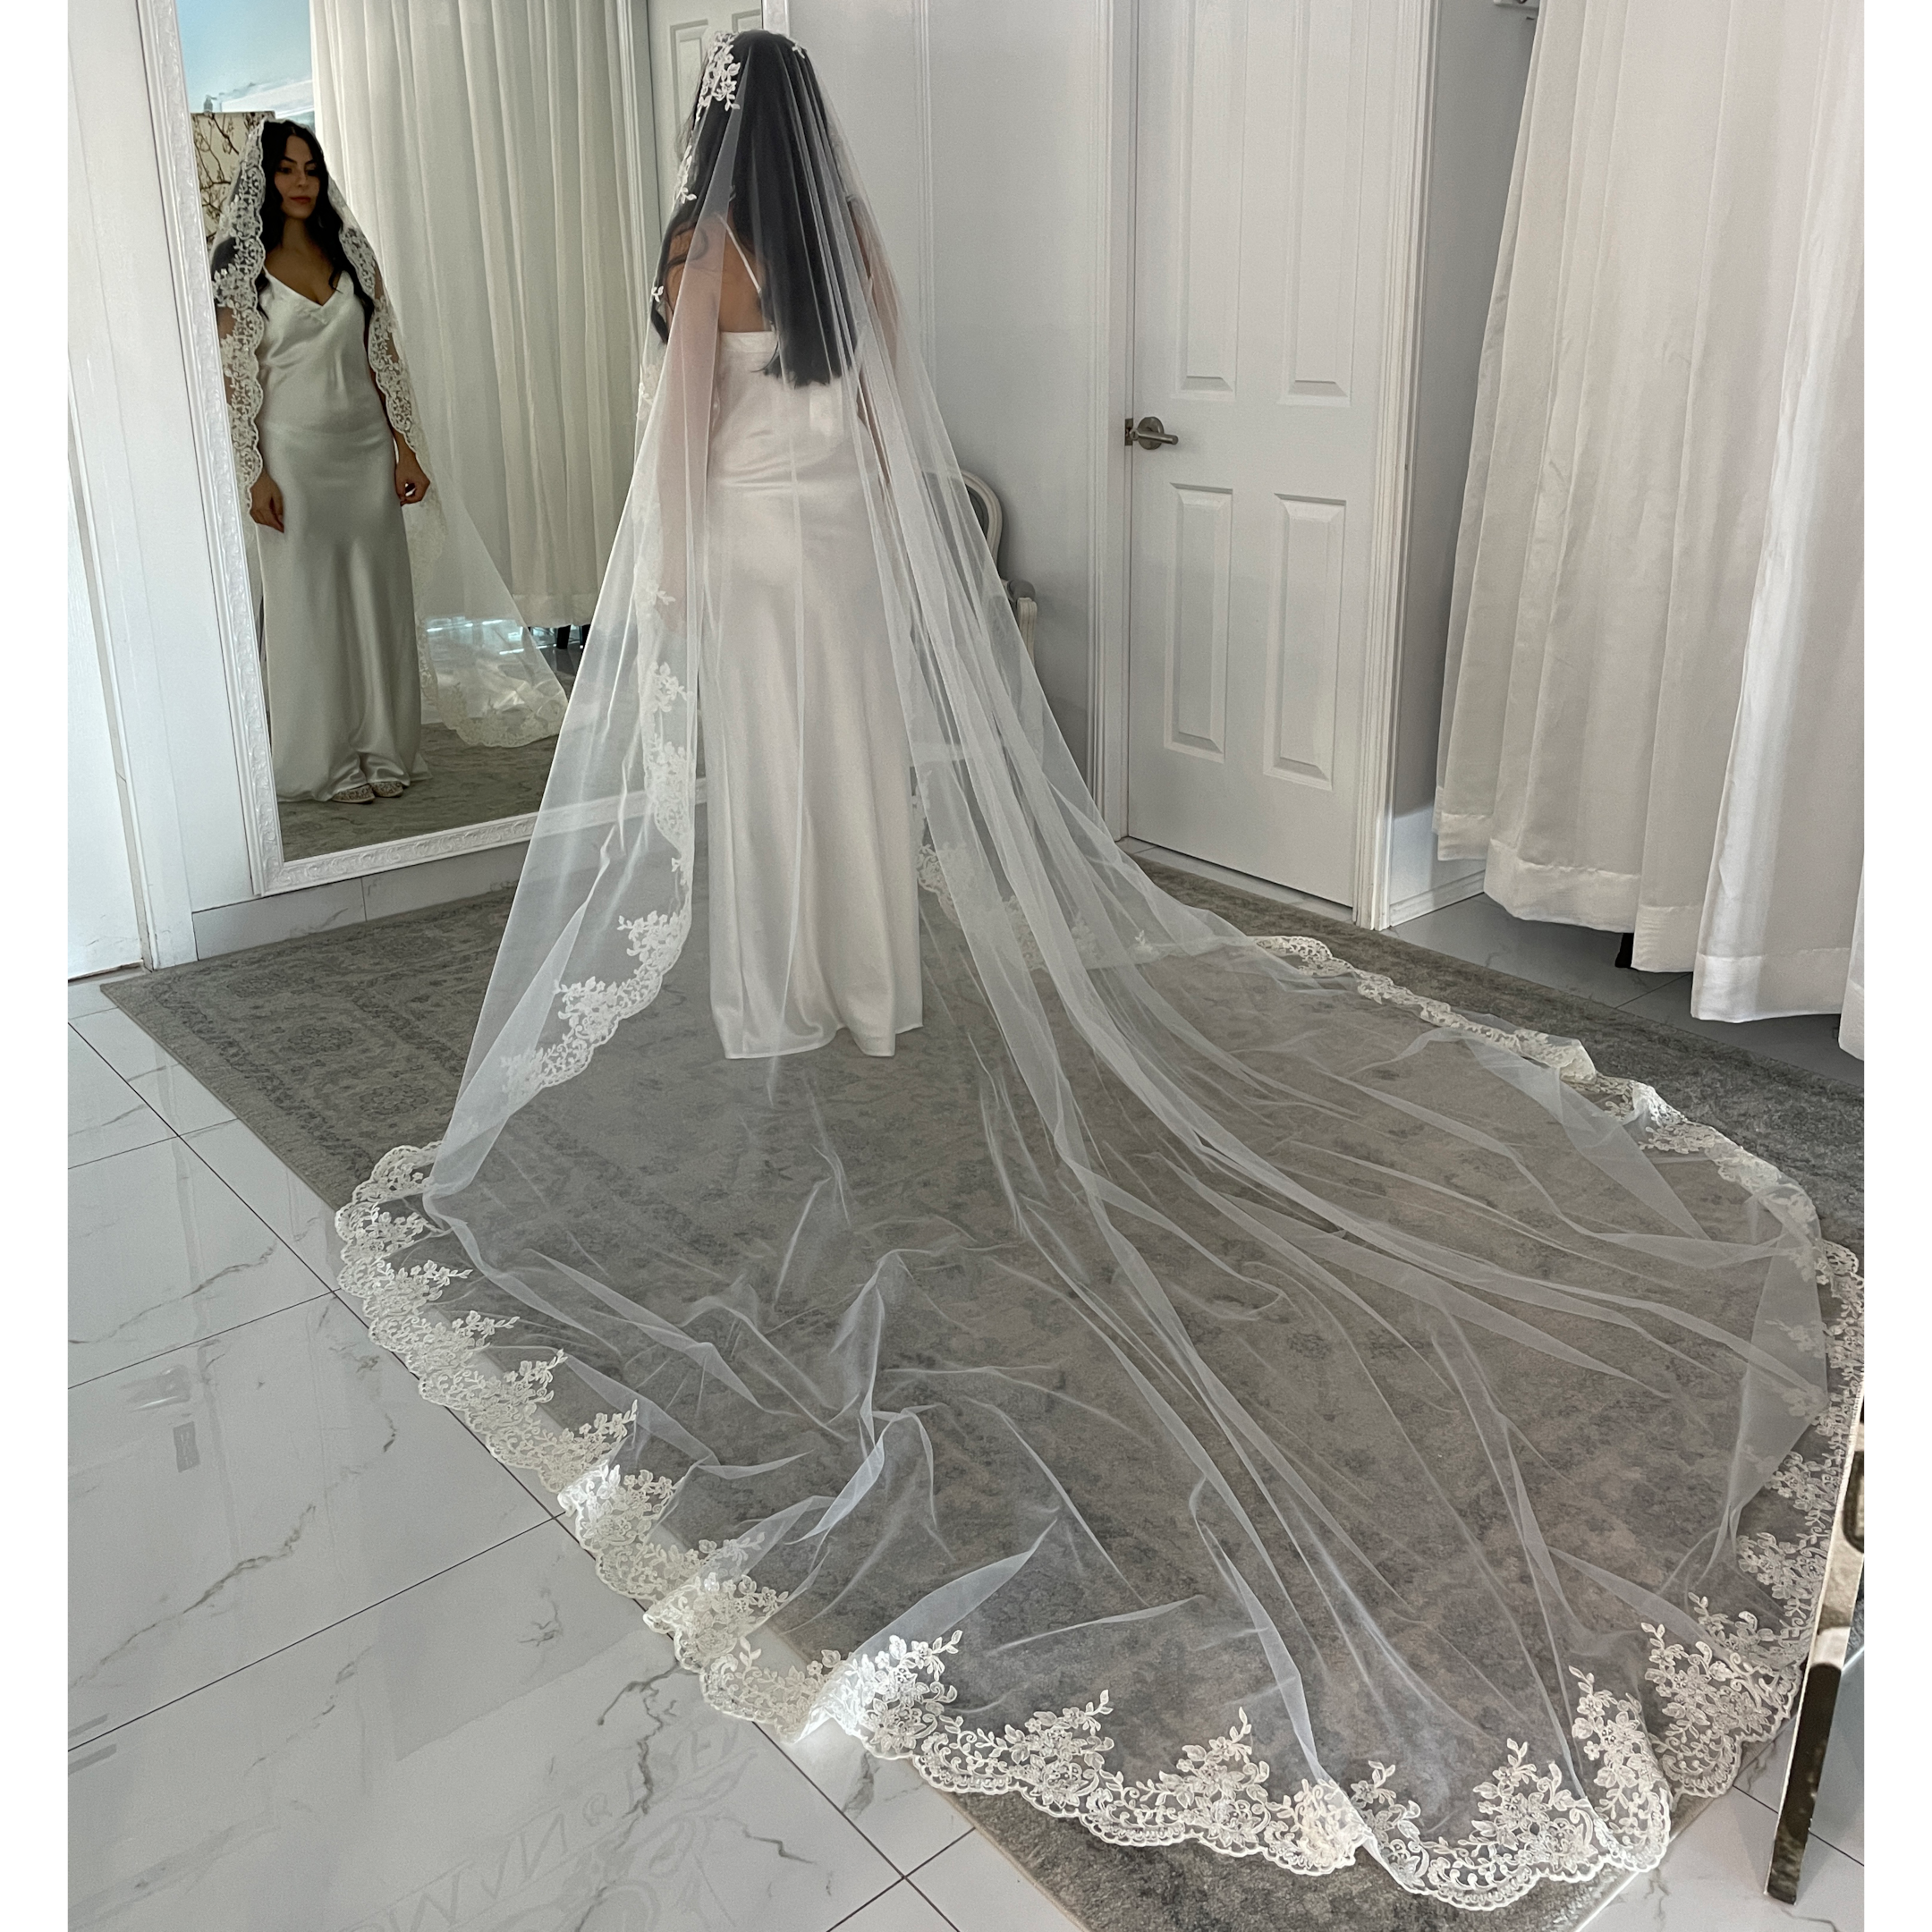 This exquisite 3 metre authentic Mantilla Veil is just divine. The peaks in the beaded lace added to the drama of the style.